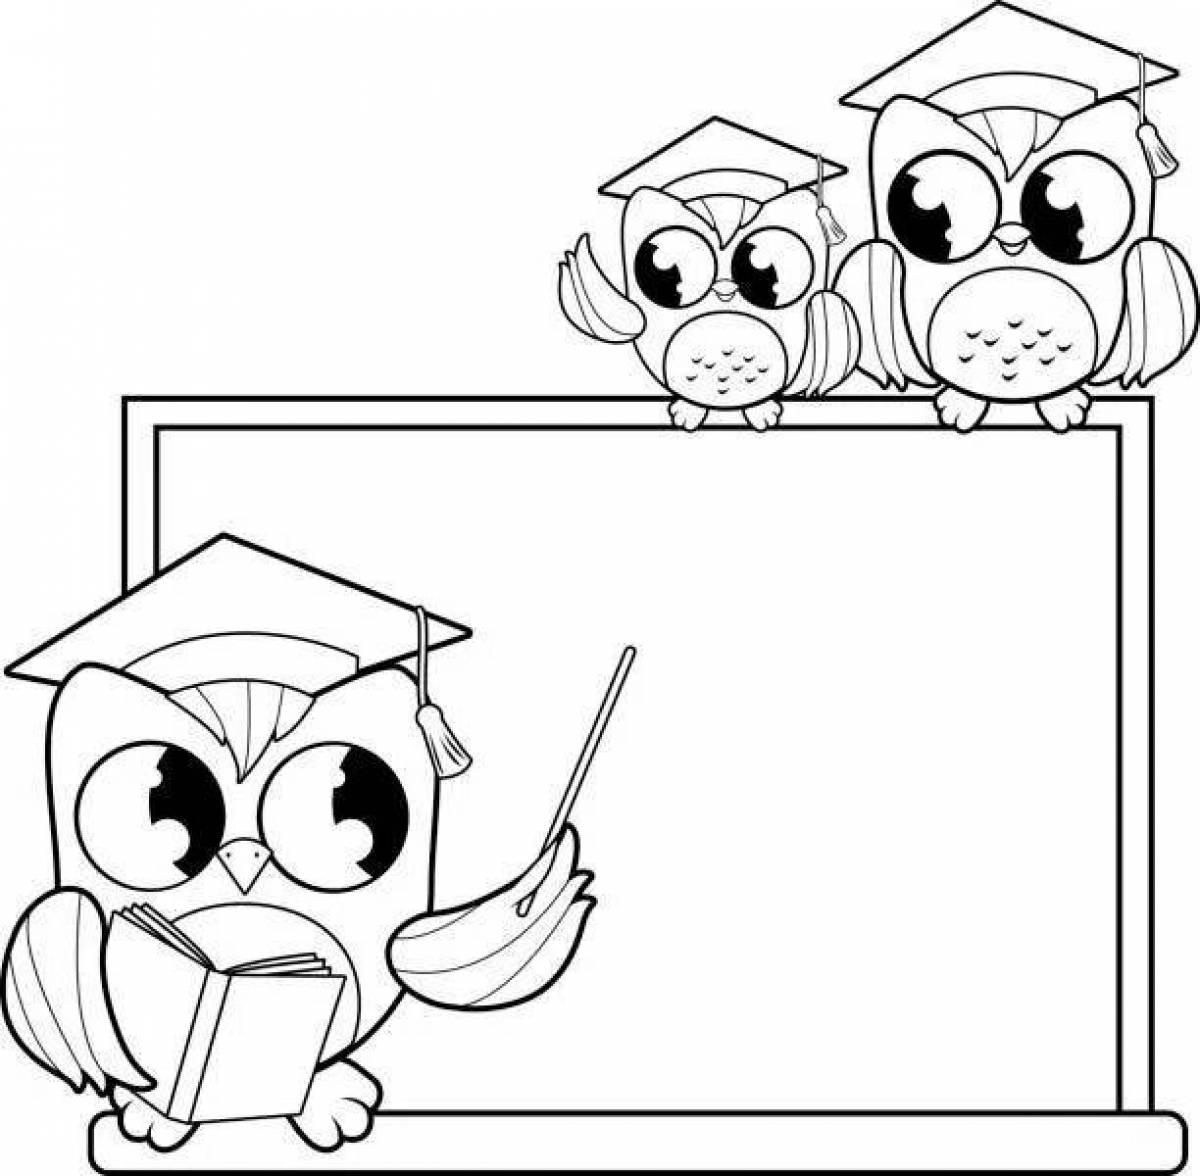 Cunning smart owl coloring page